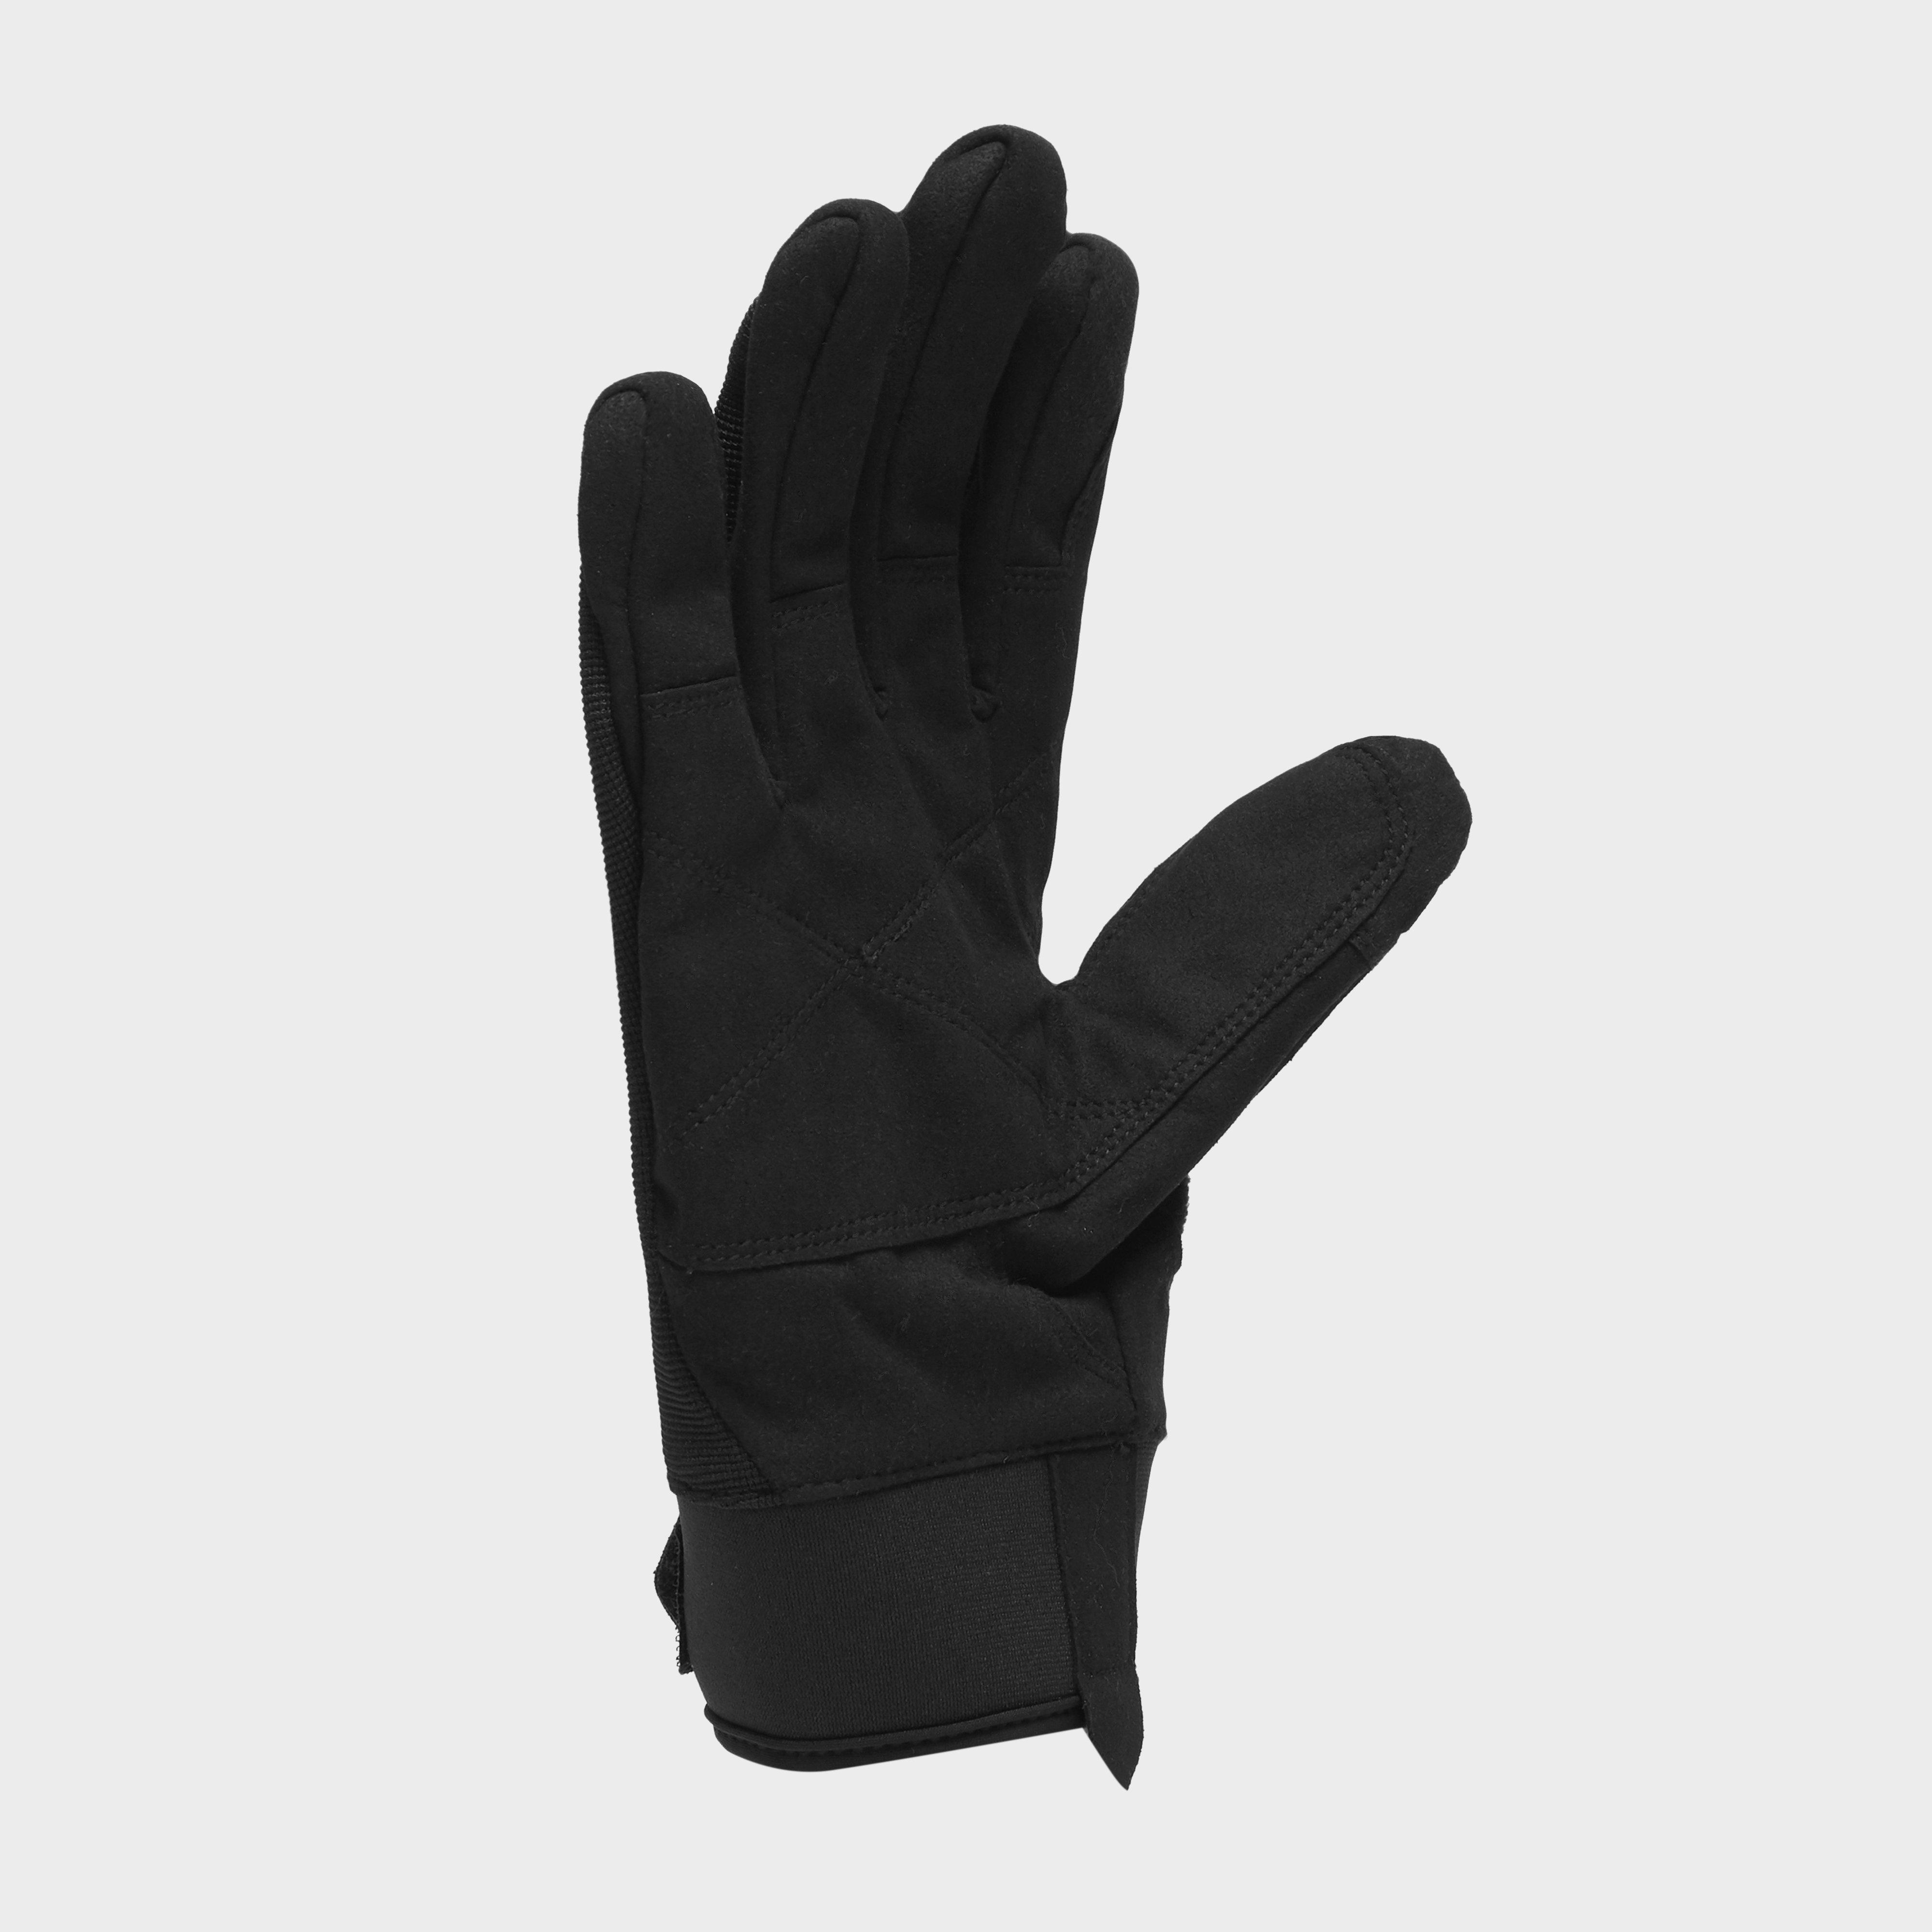 Sealskinz Waterproof All Weather Glove Review